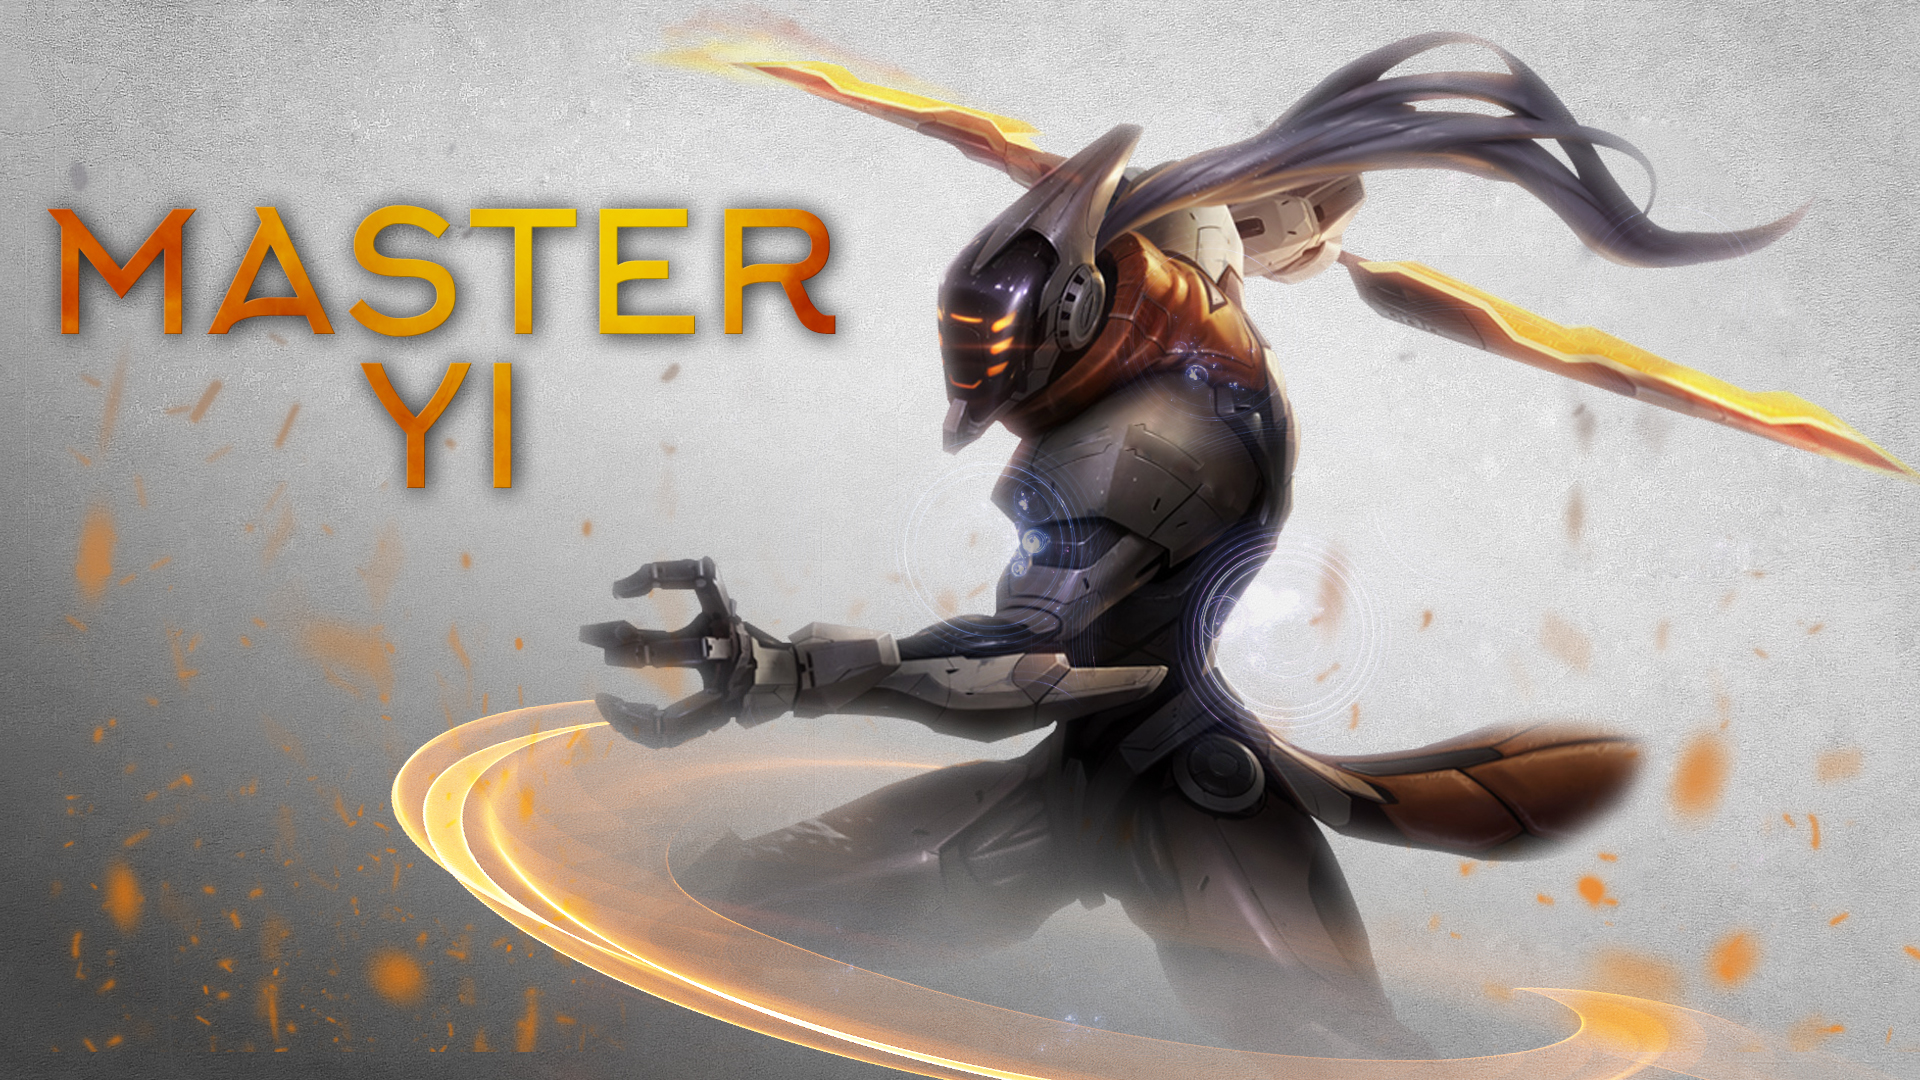 Project Master Yi Lolwallpaper